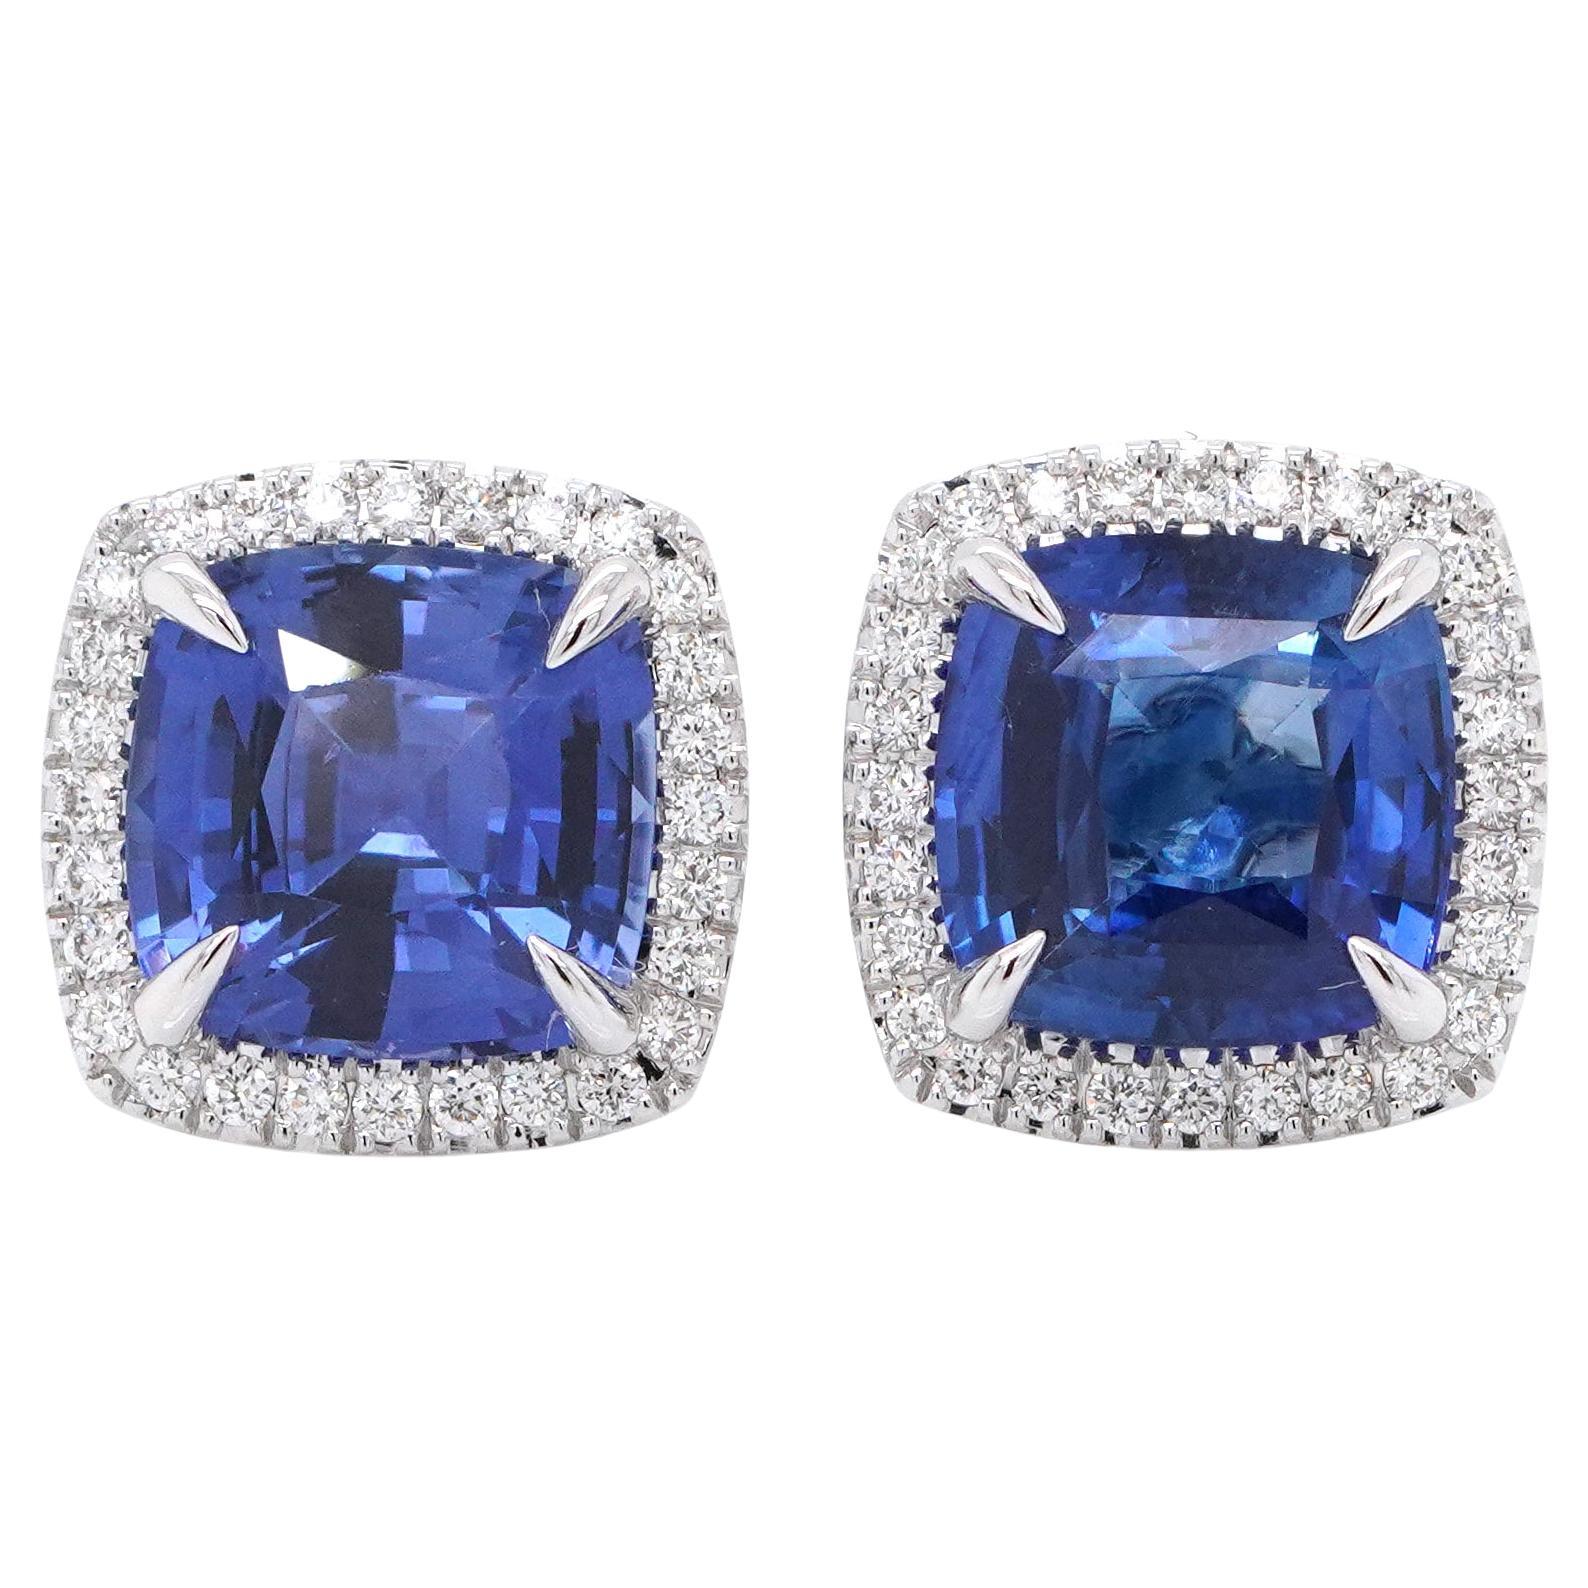 18K White Gold With Sapphire Earrings 4.06 ct. pave setting